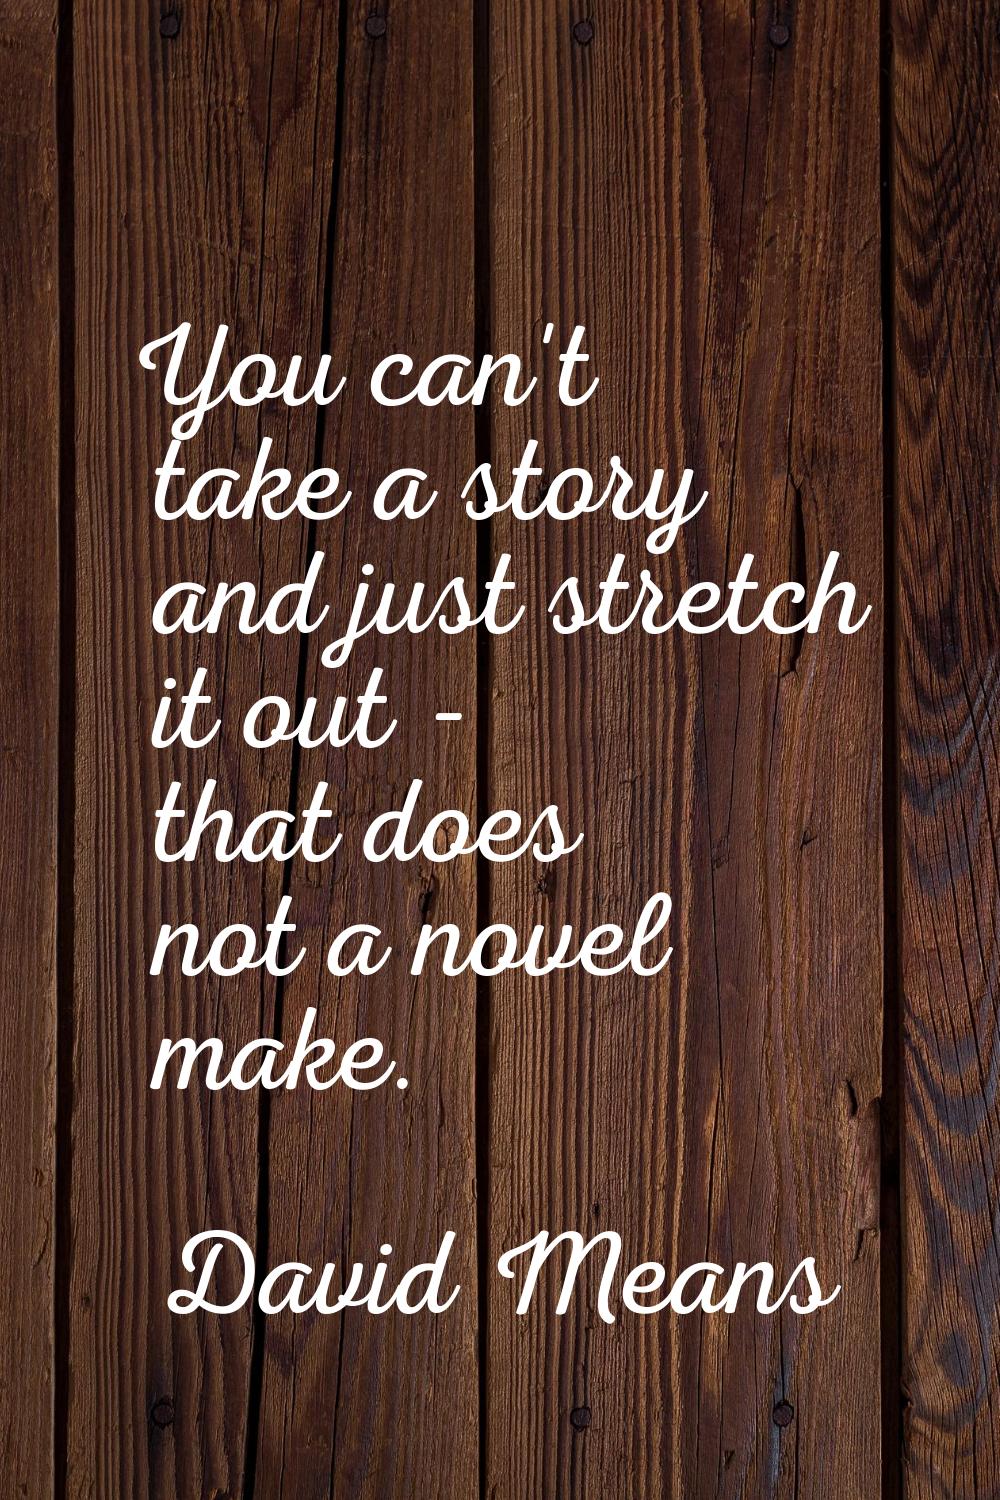 You can't take a story and just stretch it out - that does not a novel make.